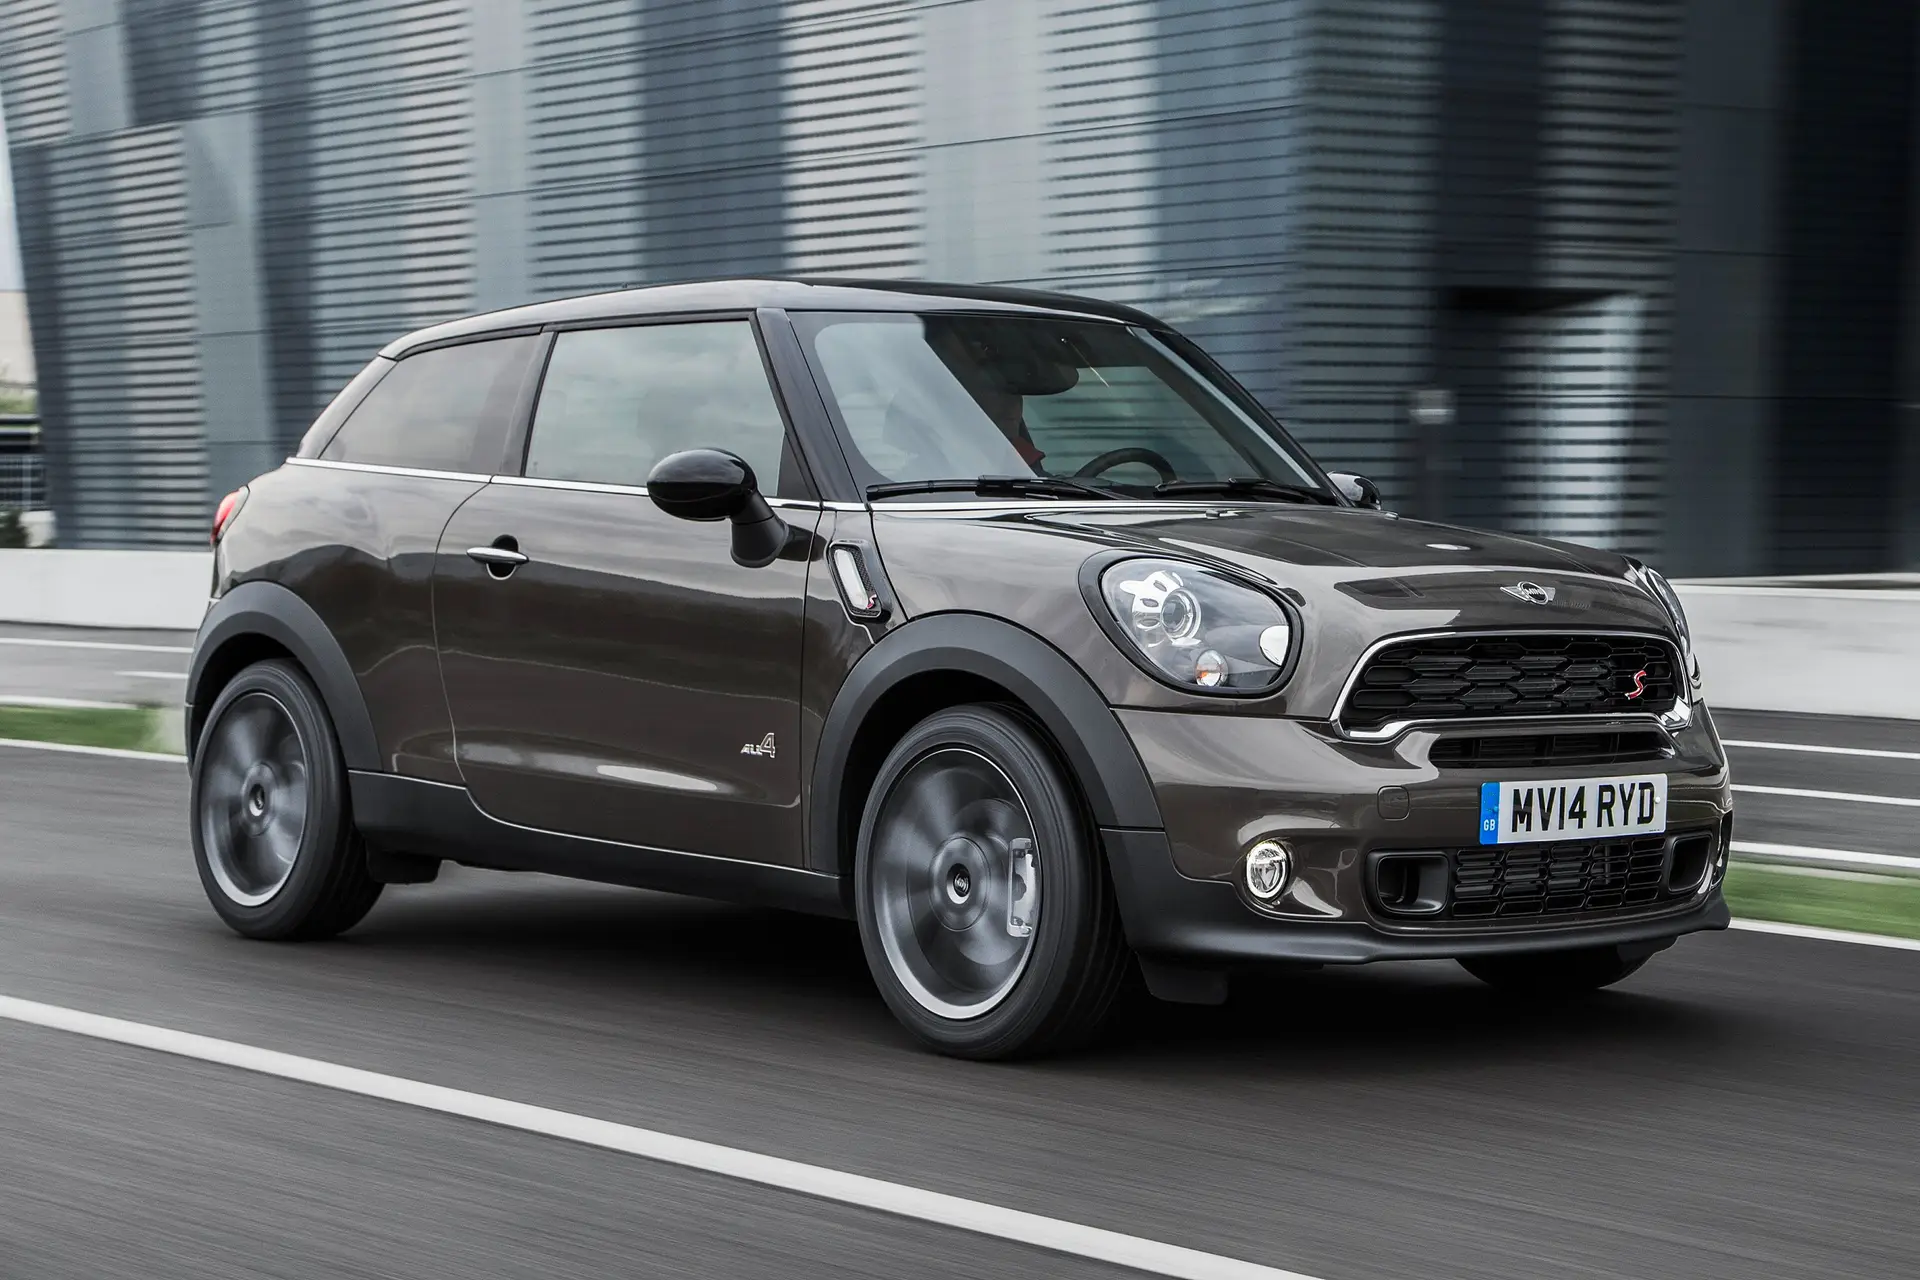 MINI Paceman (2013-2016) Review: exterior front three quarter photo of the MINI Paceman on the road